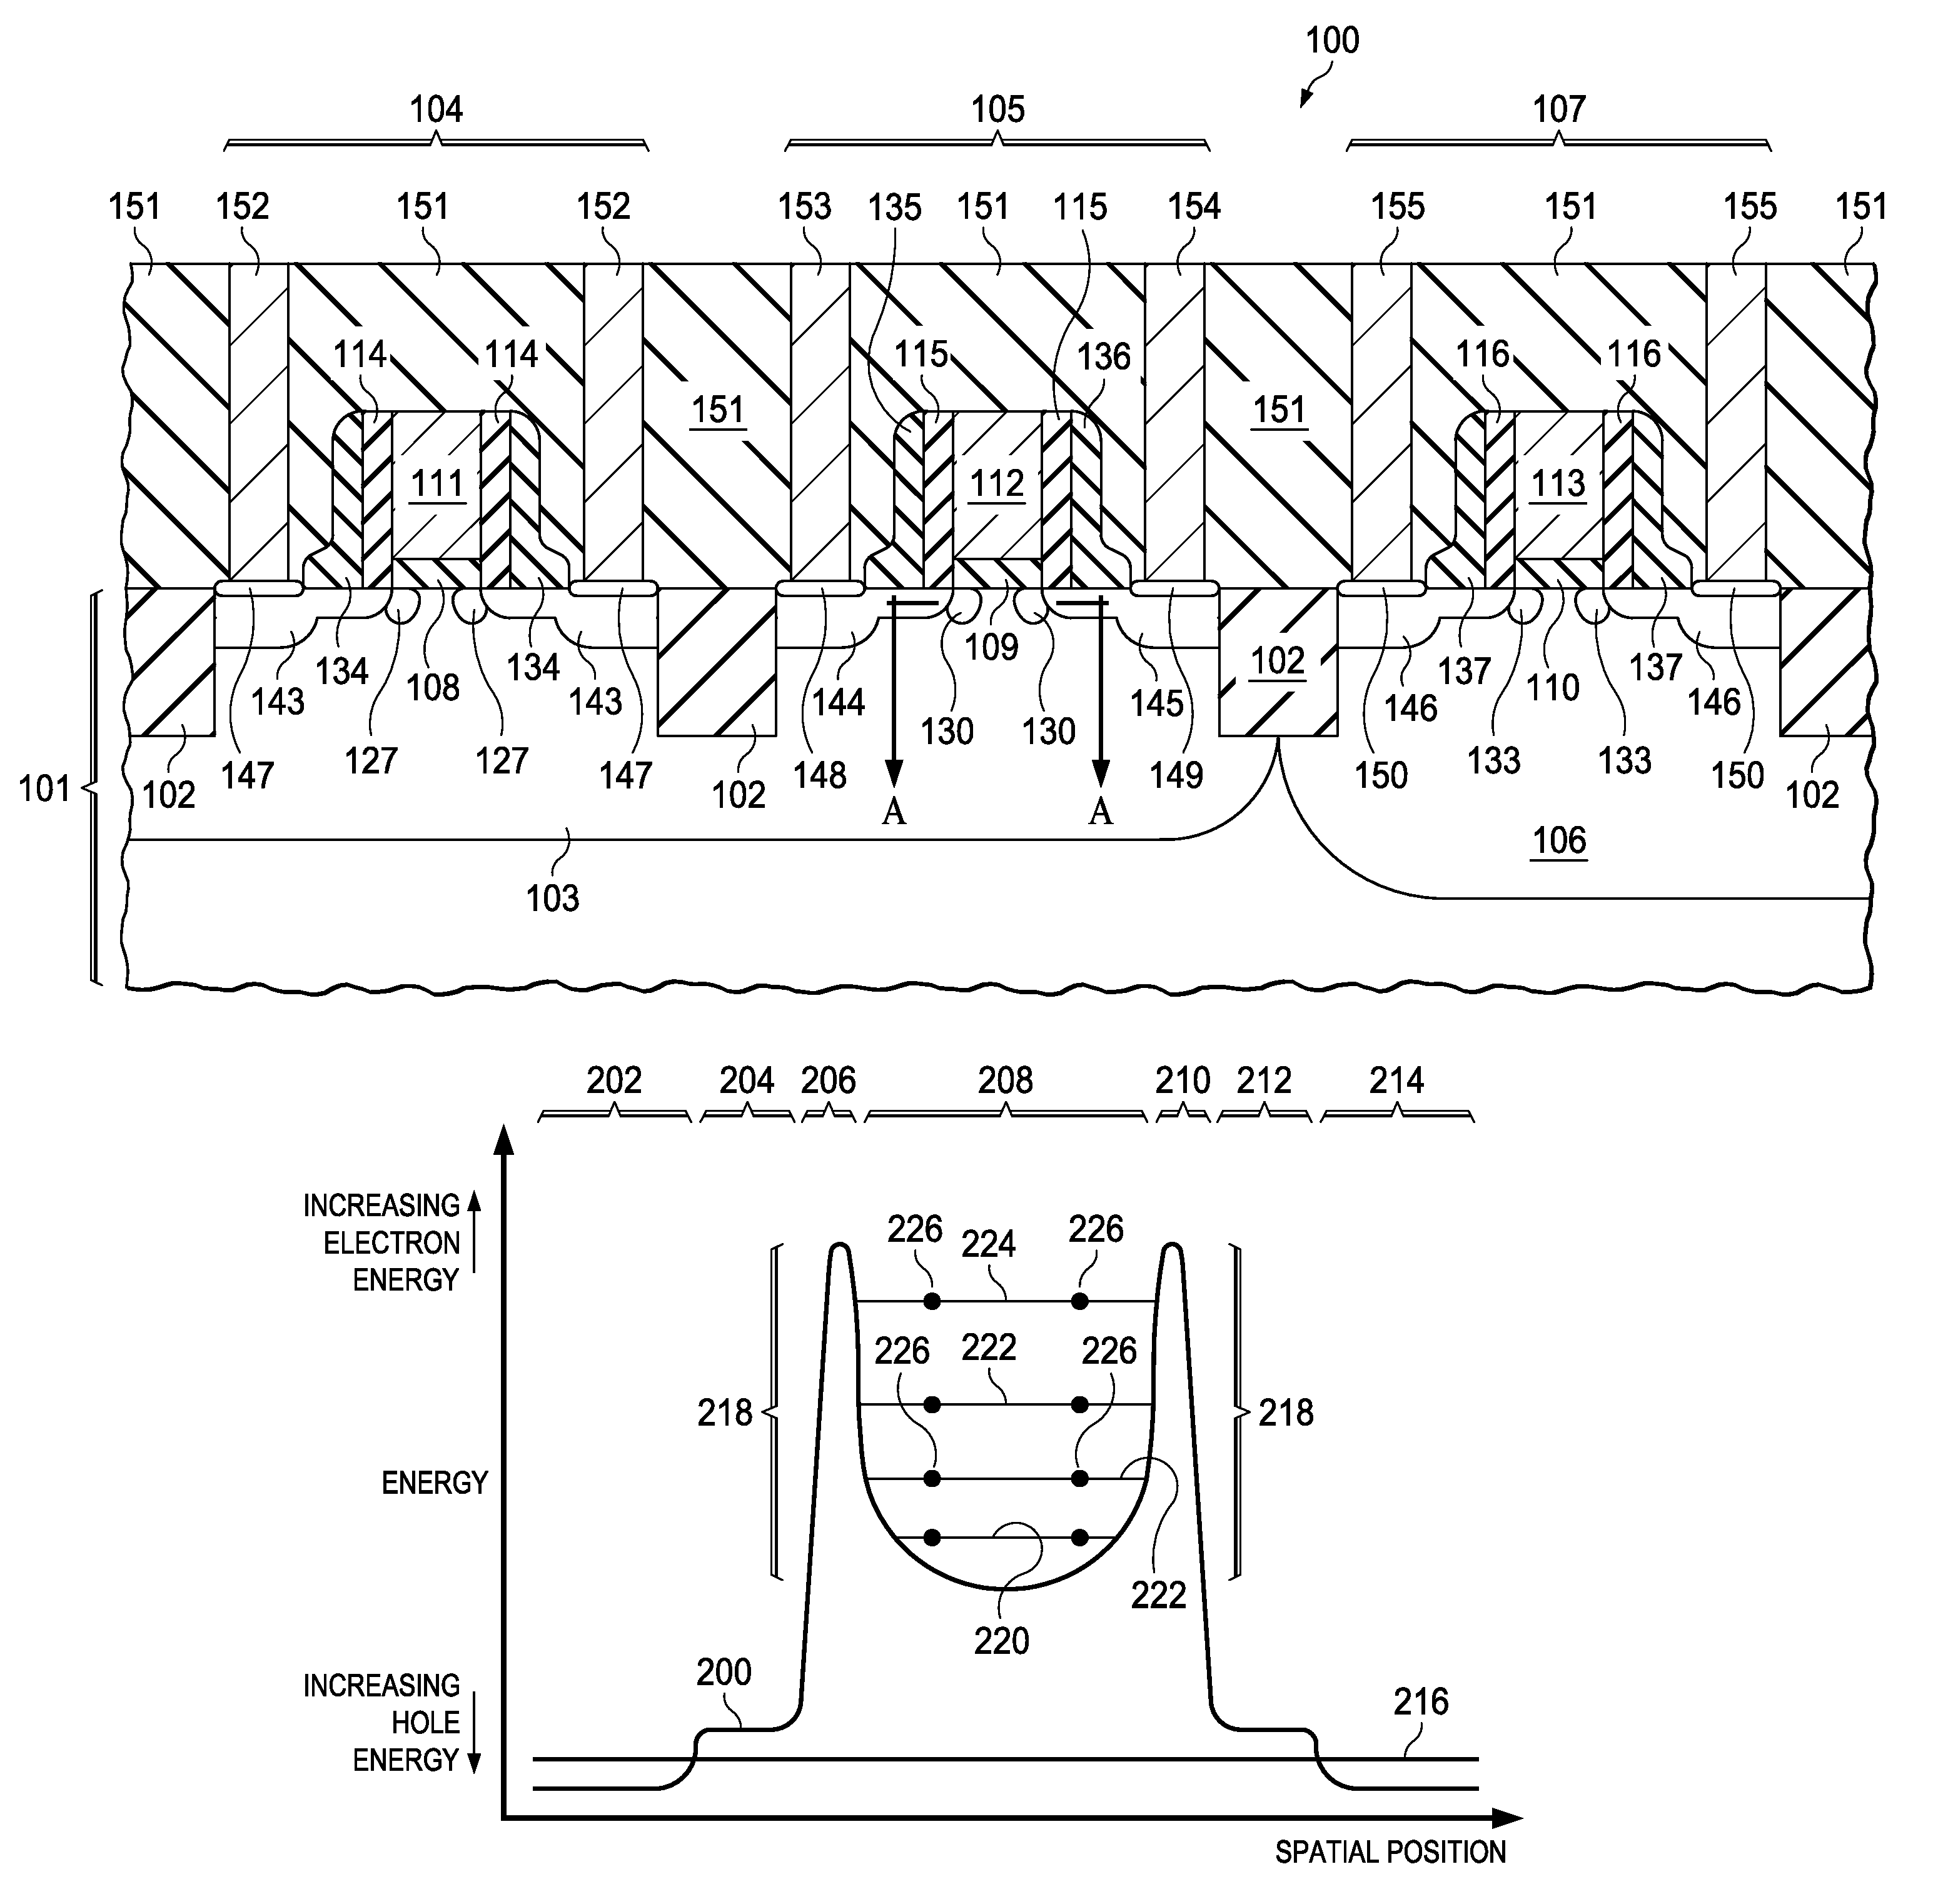 Gated quantum resonant tunneling diode using CMOS transistor with modified pocket and LDD implants